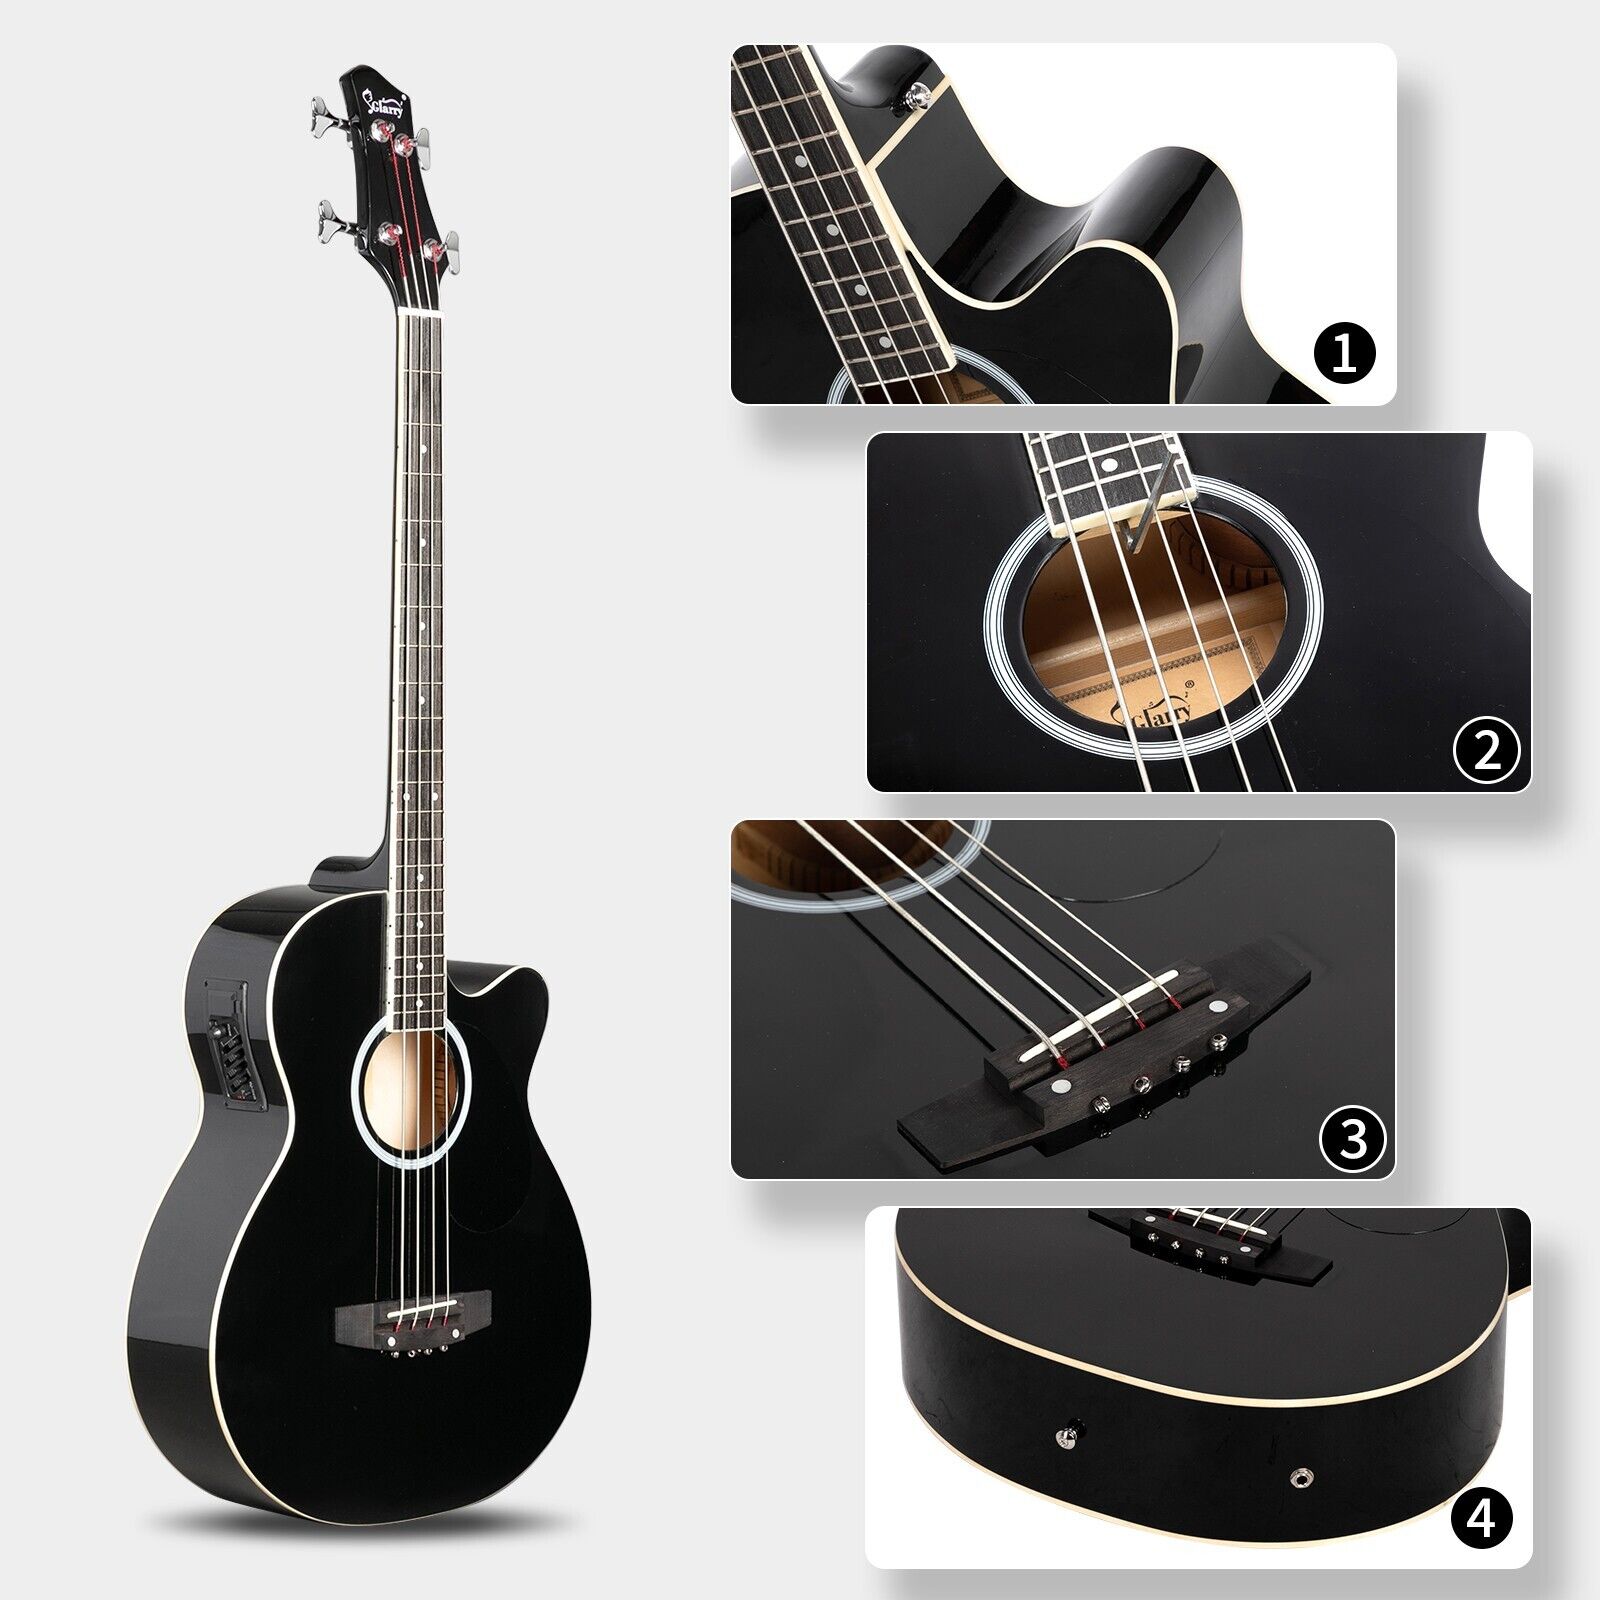 Glarry GMB101 Black 4 string Electric Acoustic Bass Guitar w/ 4-Band Equalizer 9